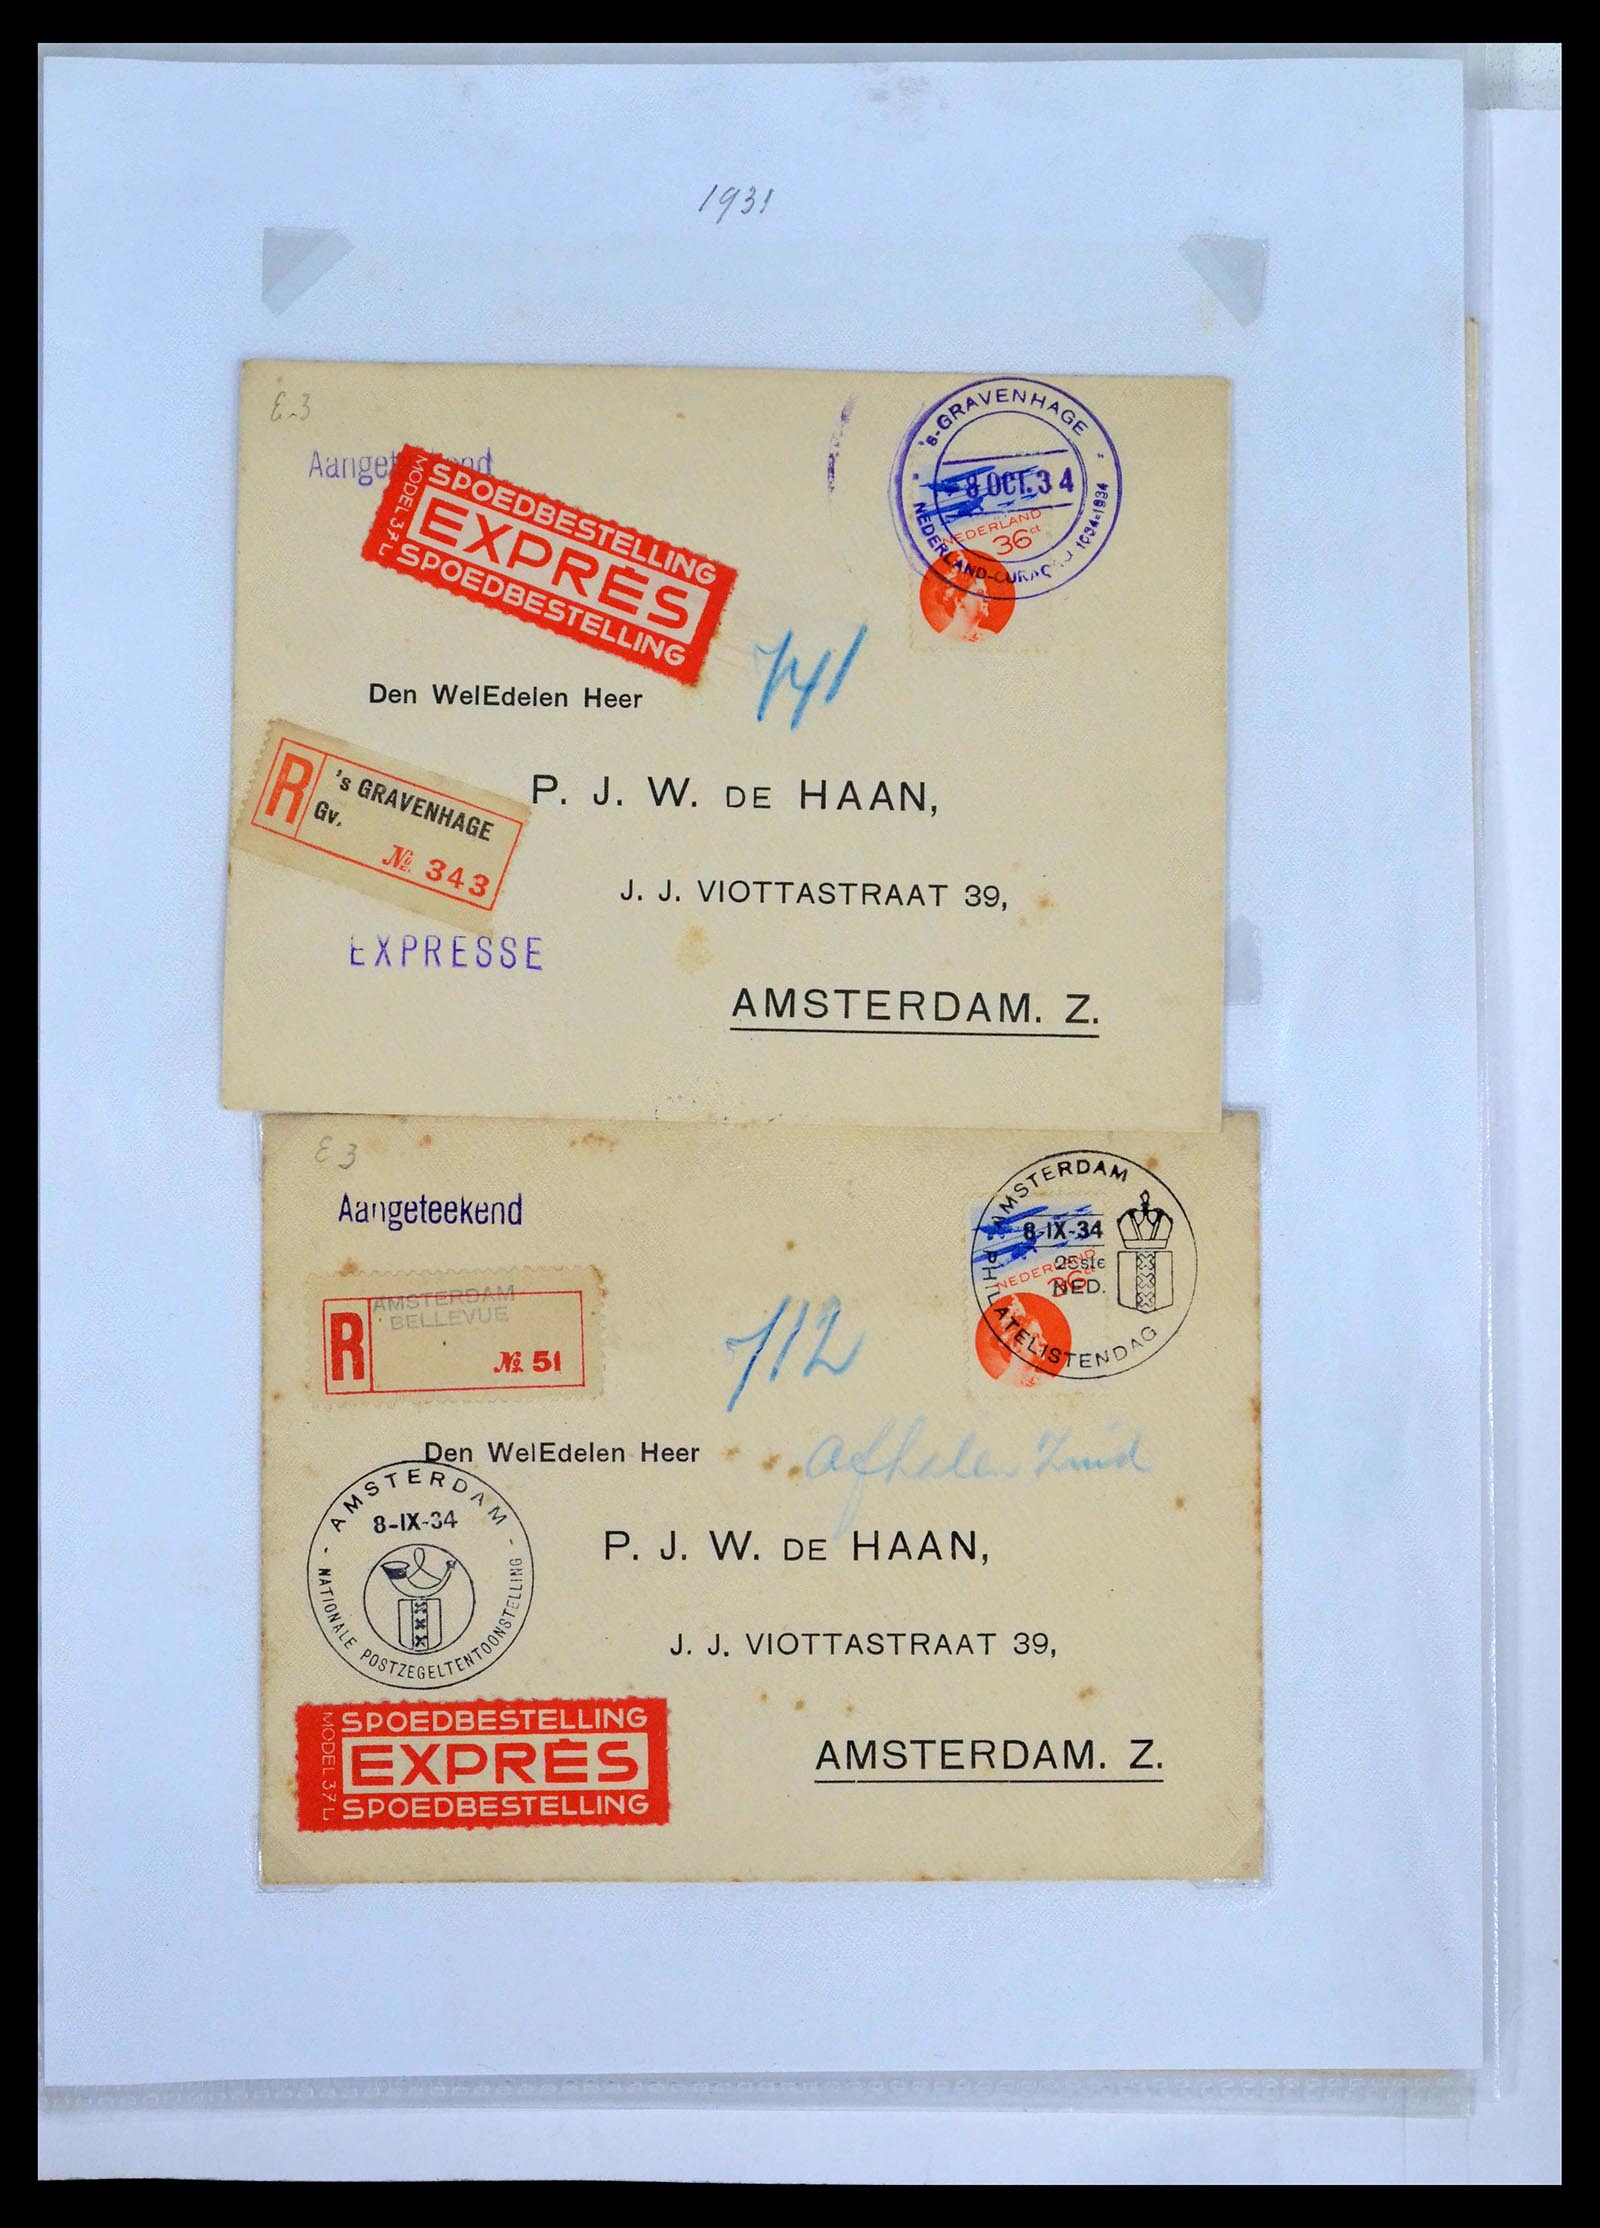 39429 0103 - Stamp collection 39429 Netherlands covers 1821-1955.